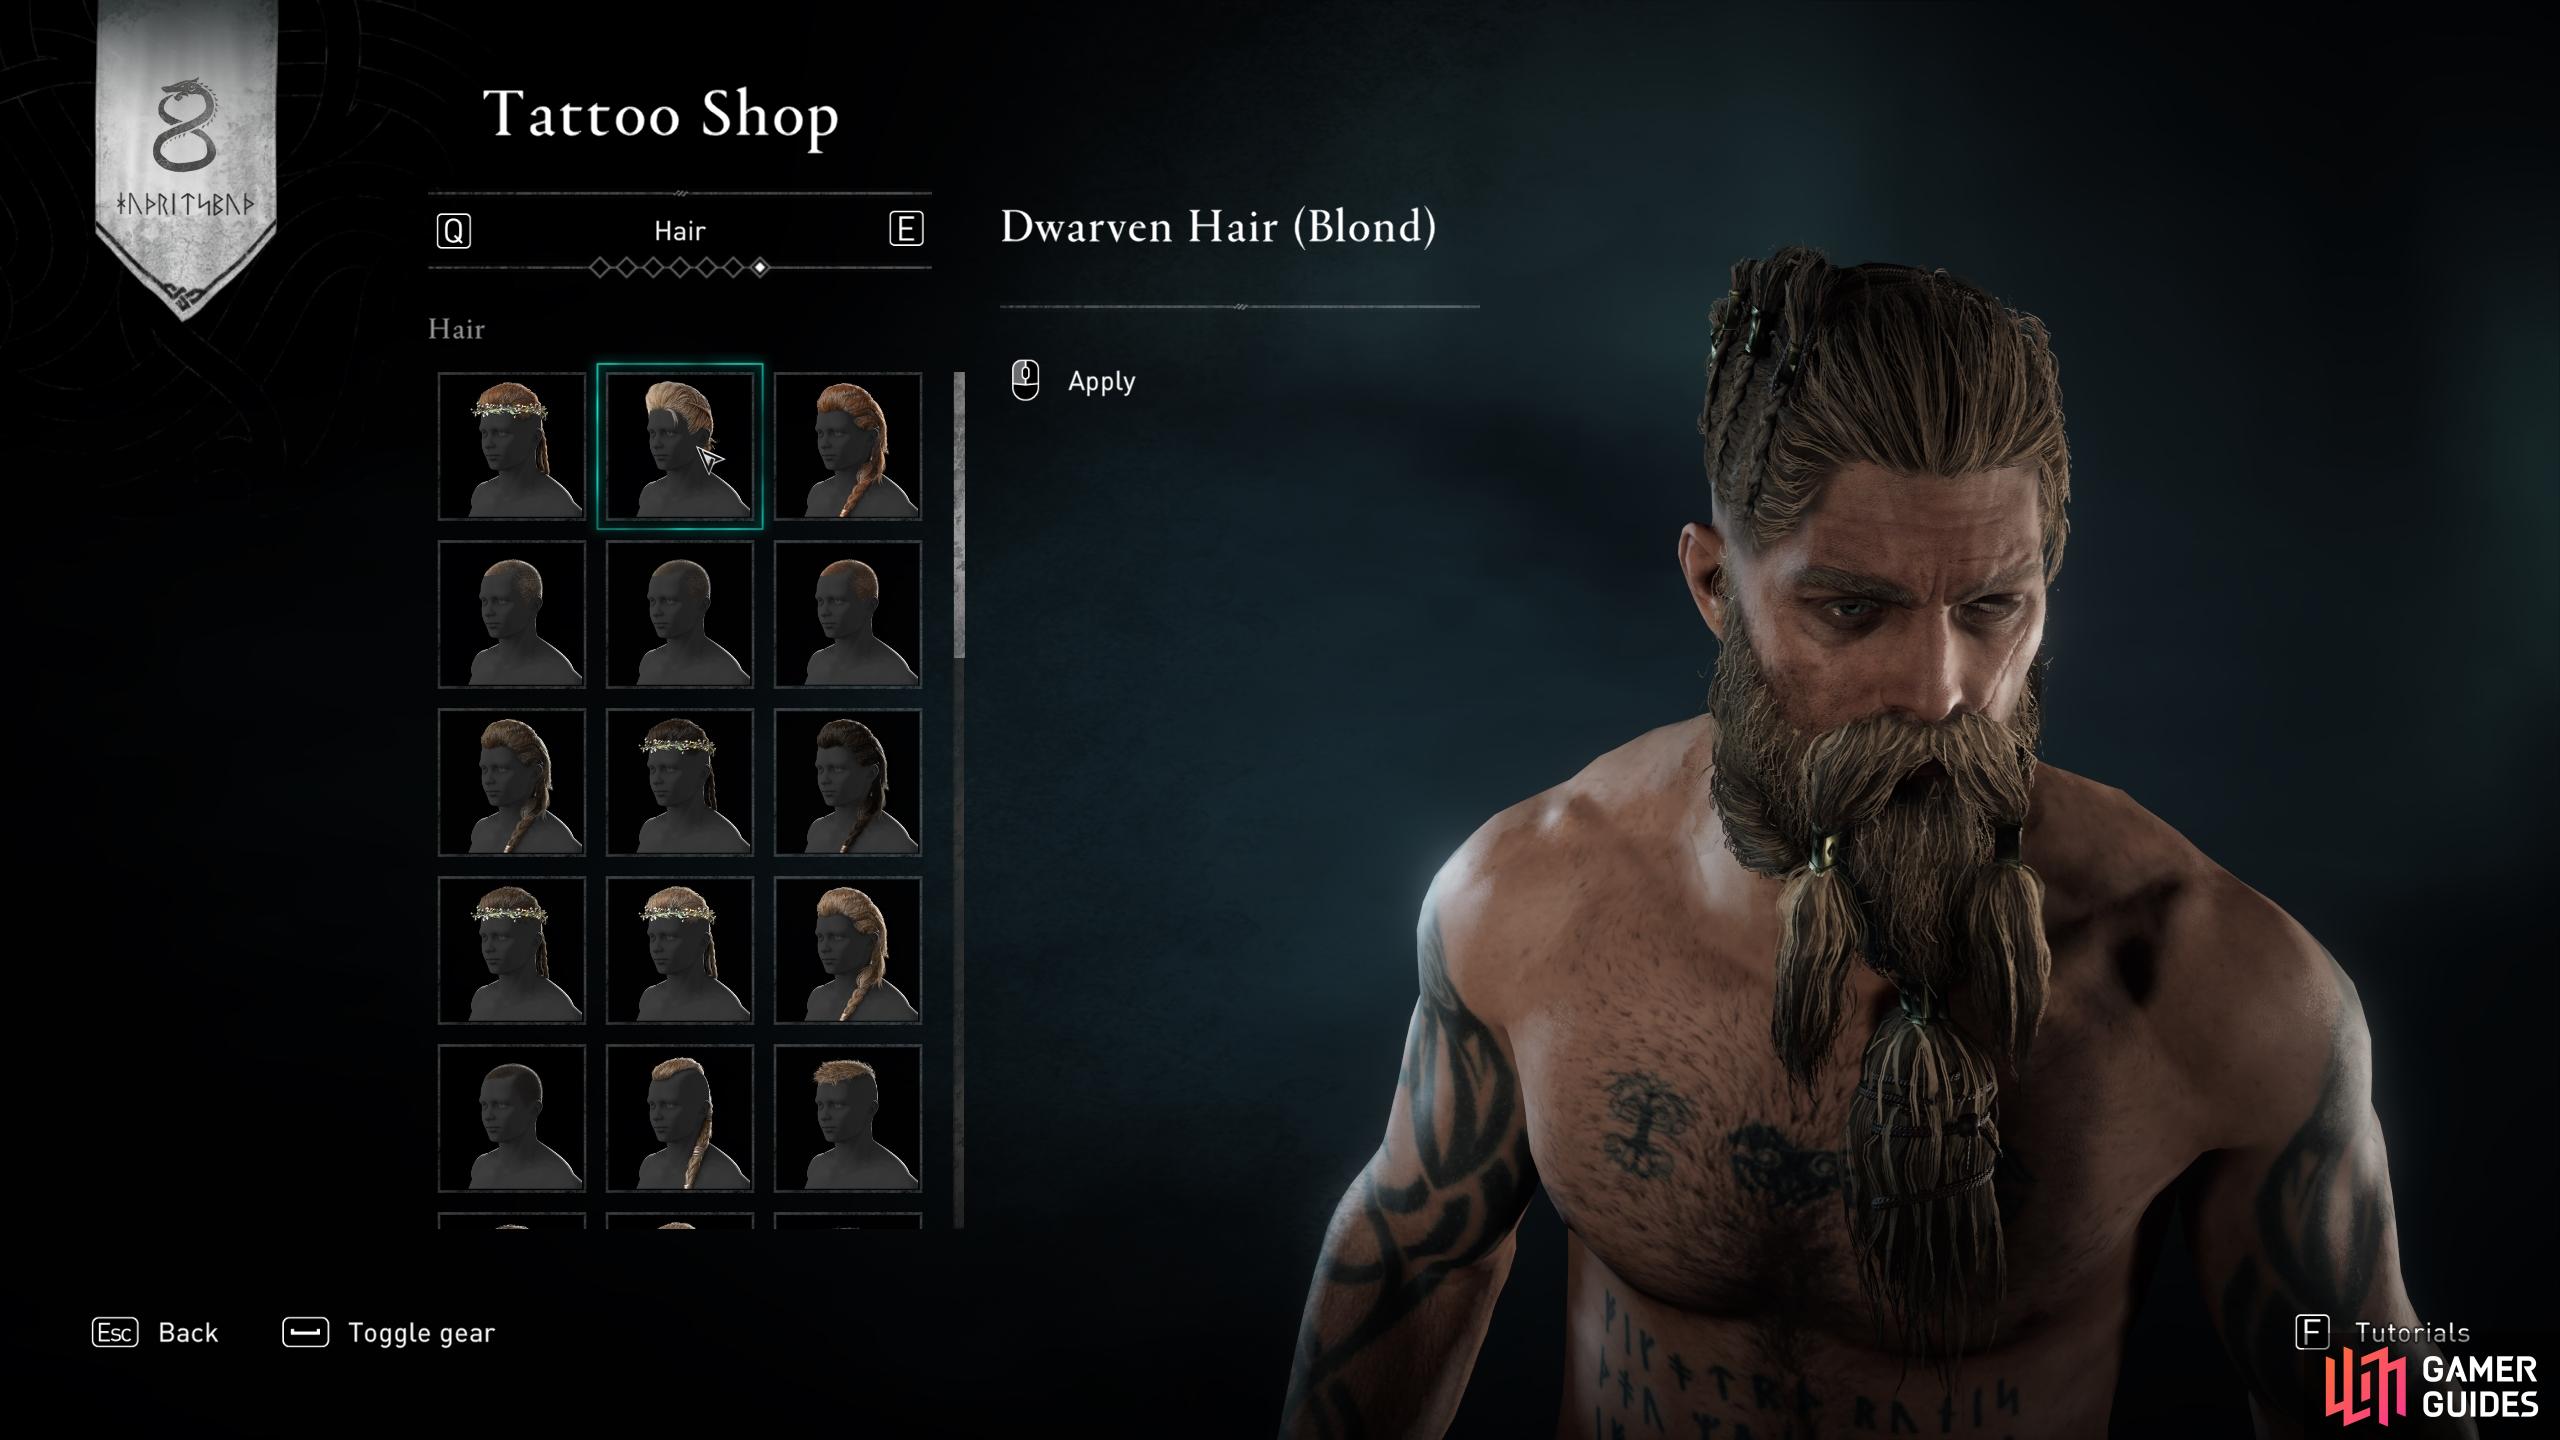 But it's all worth it to gain the rewards, like this impressive Dwarven beard!